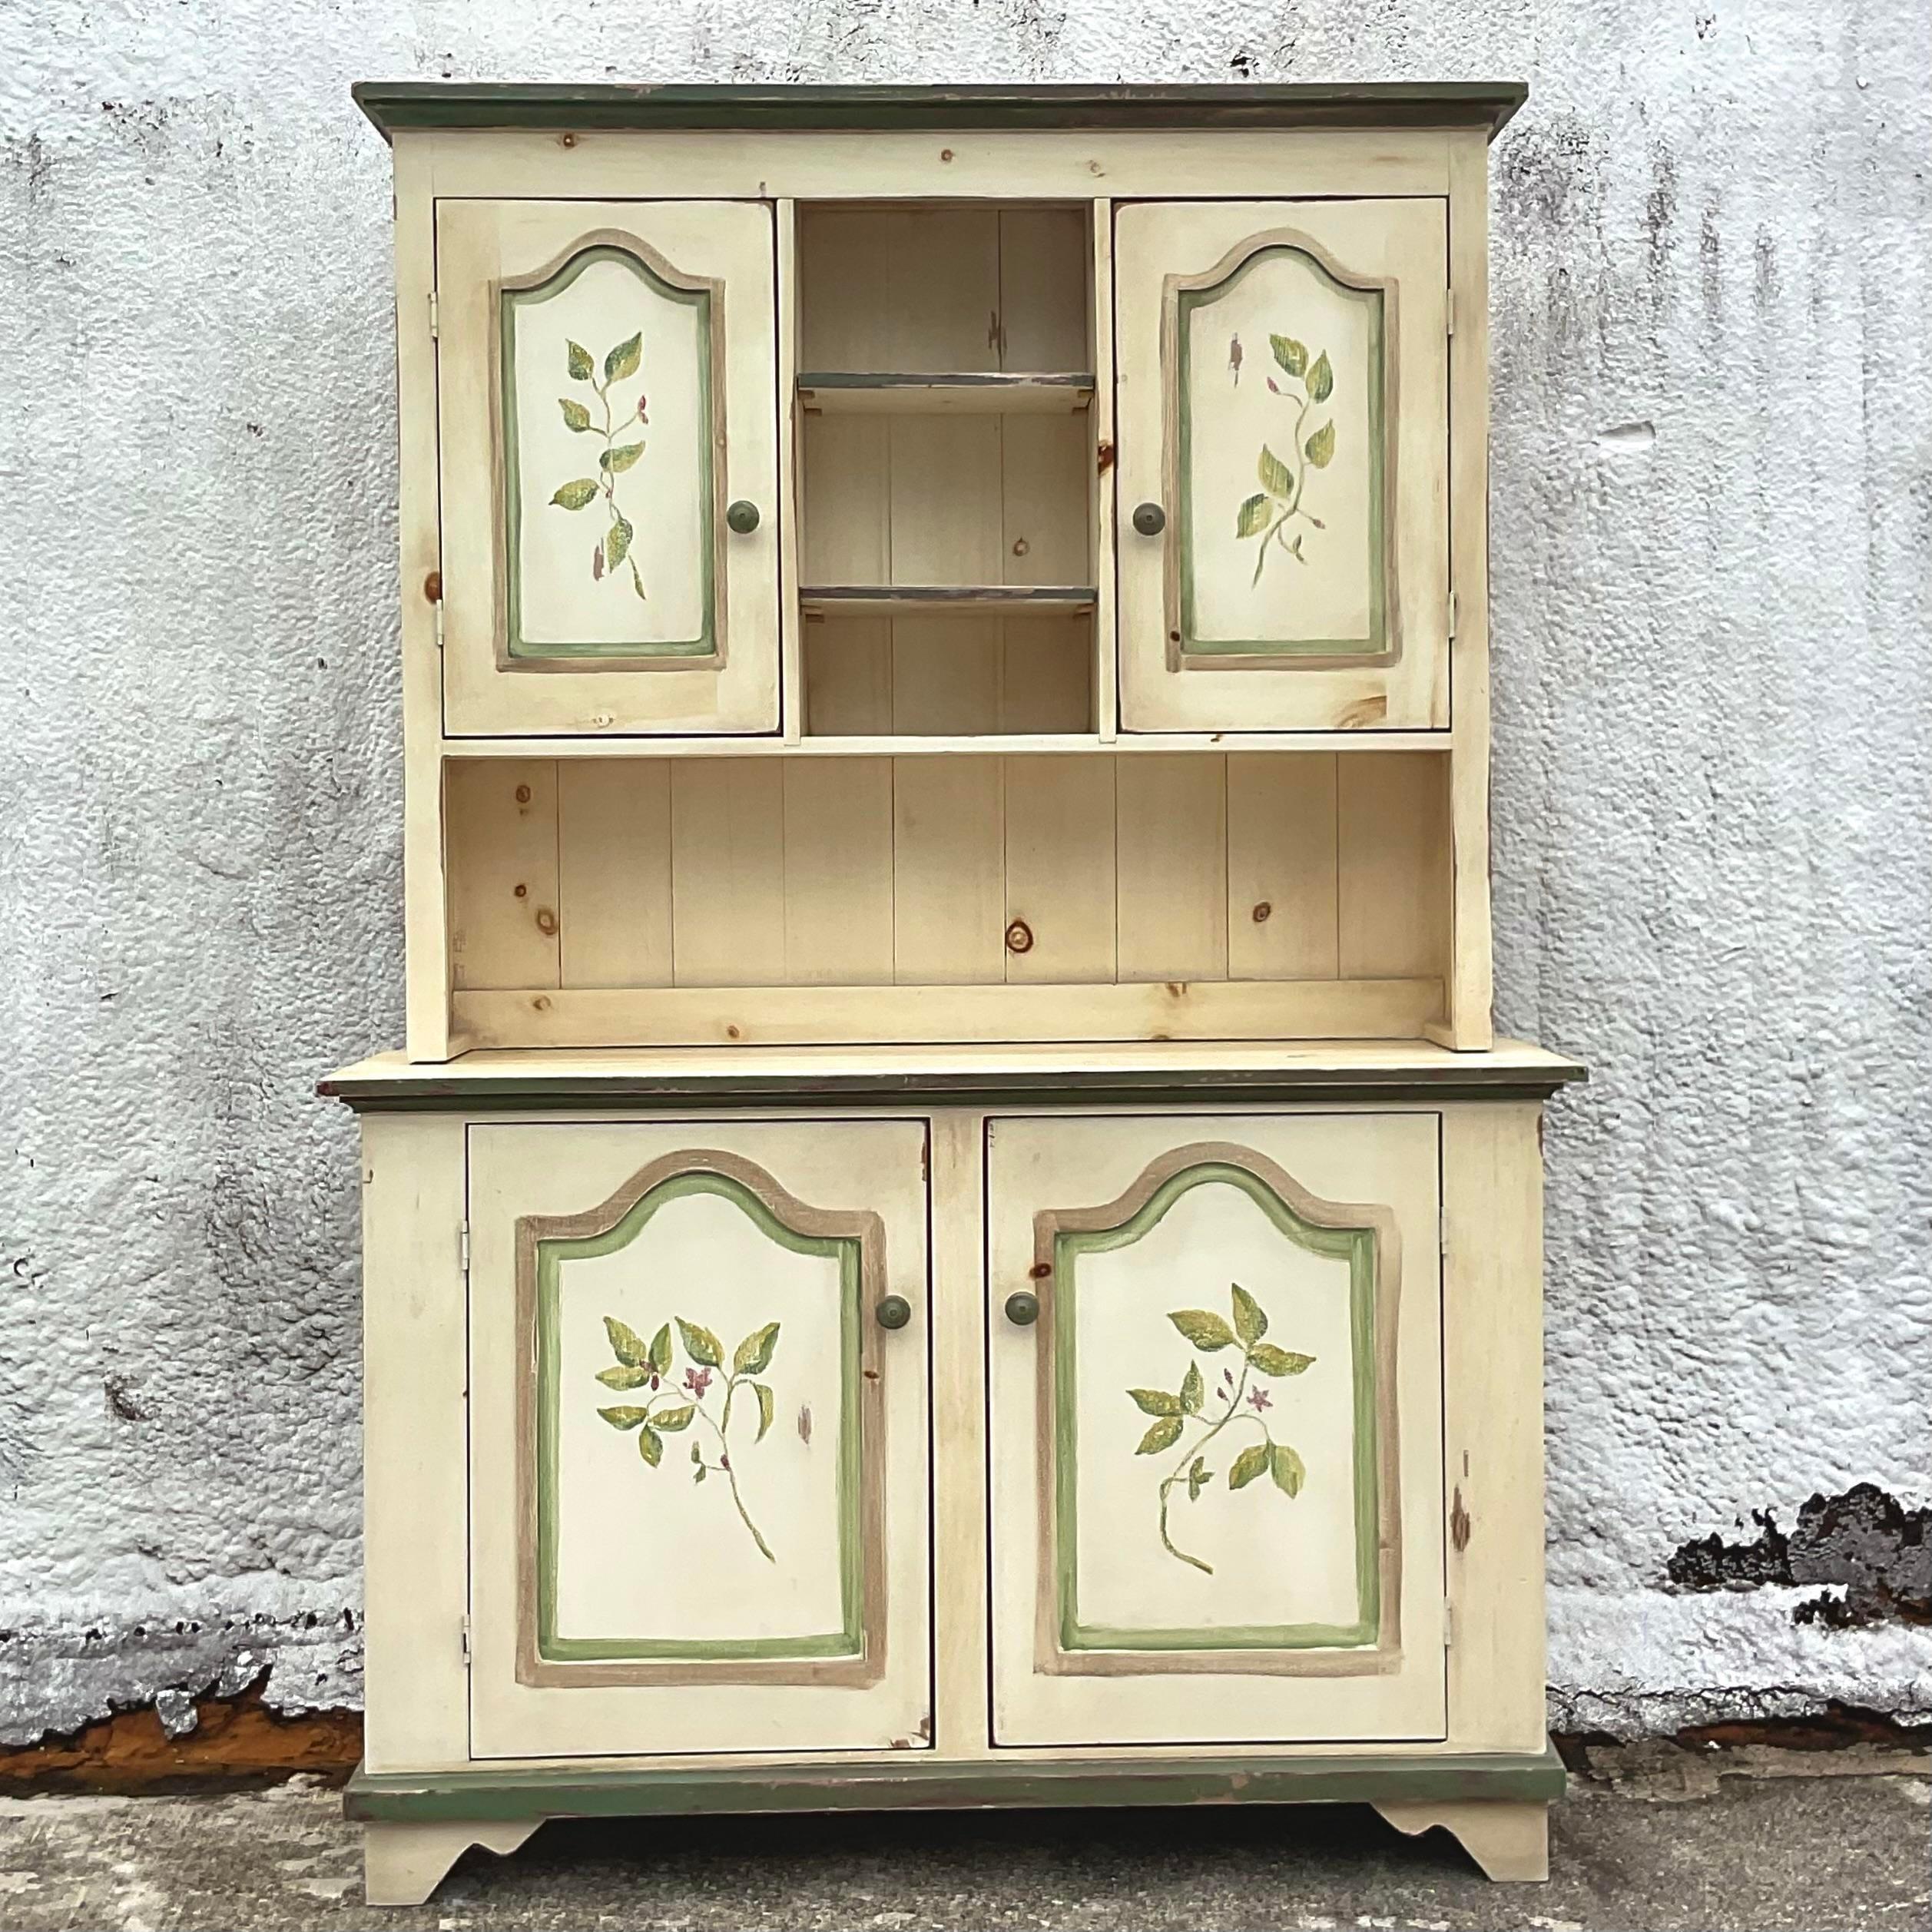 A fantastic vintage Boho China hutch. Beautiful hand painted detail in chic pale colors. Lots of great storage below and above. Acquired from a palm Beach estate.